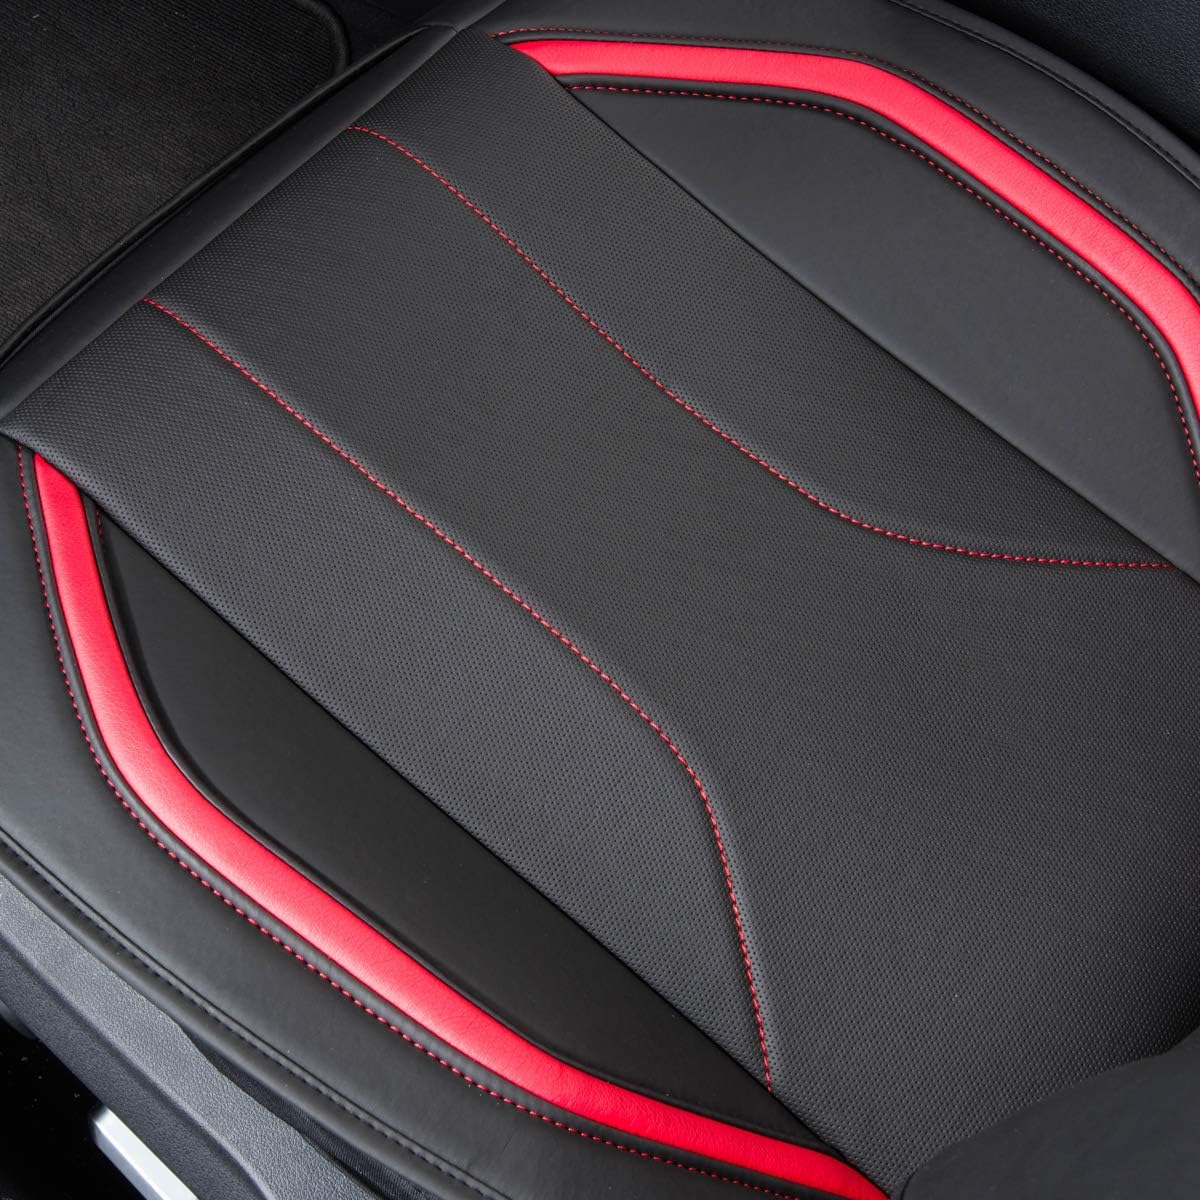 CAR PASS Universal Fit Sporty Leather Easy Install Sidelss Car Seat Cover, Seat Cushion,Fit for suvs,Vans,sedans,Truck(Black and Red)